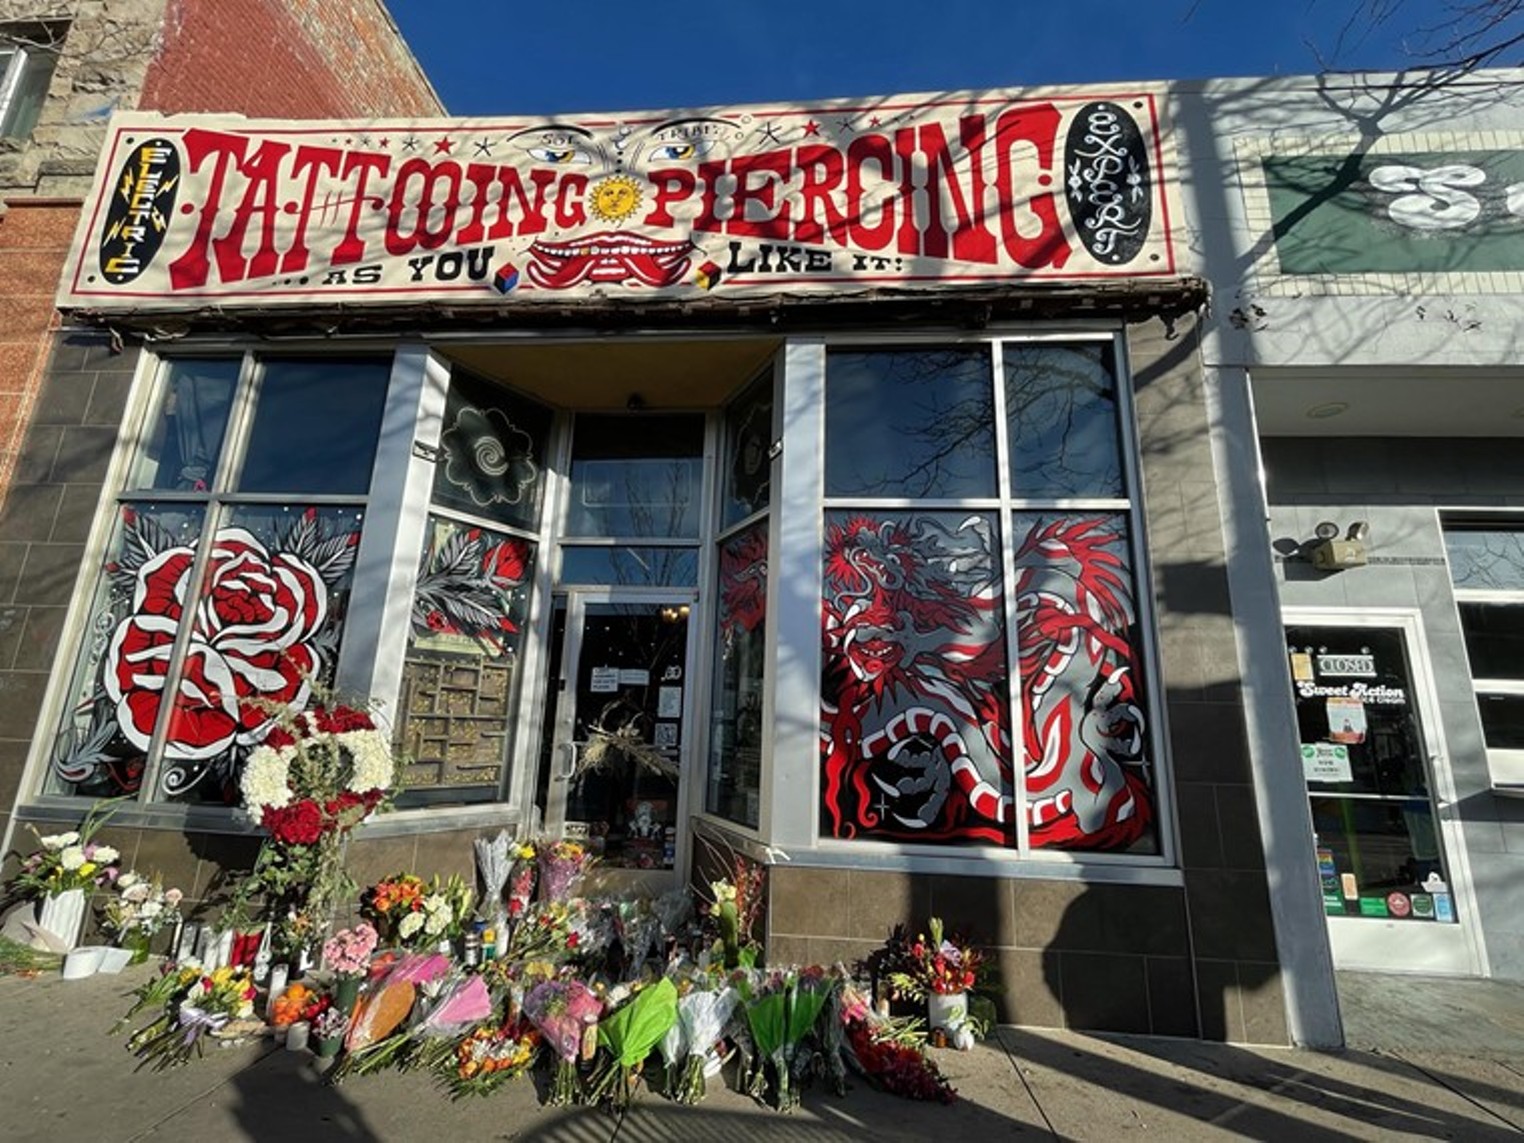 Tattoo Artists and Shops Unite Fundraiser Benefiting Shooting Victims | Westword